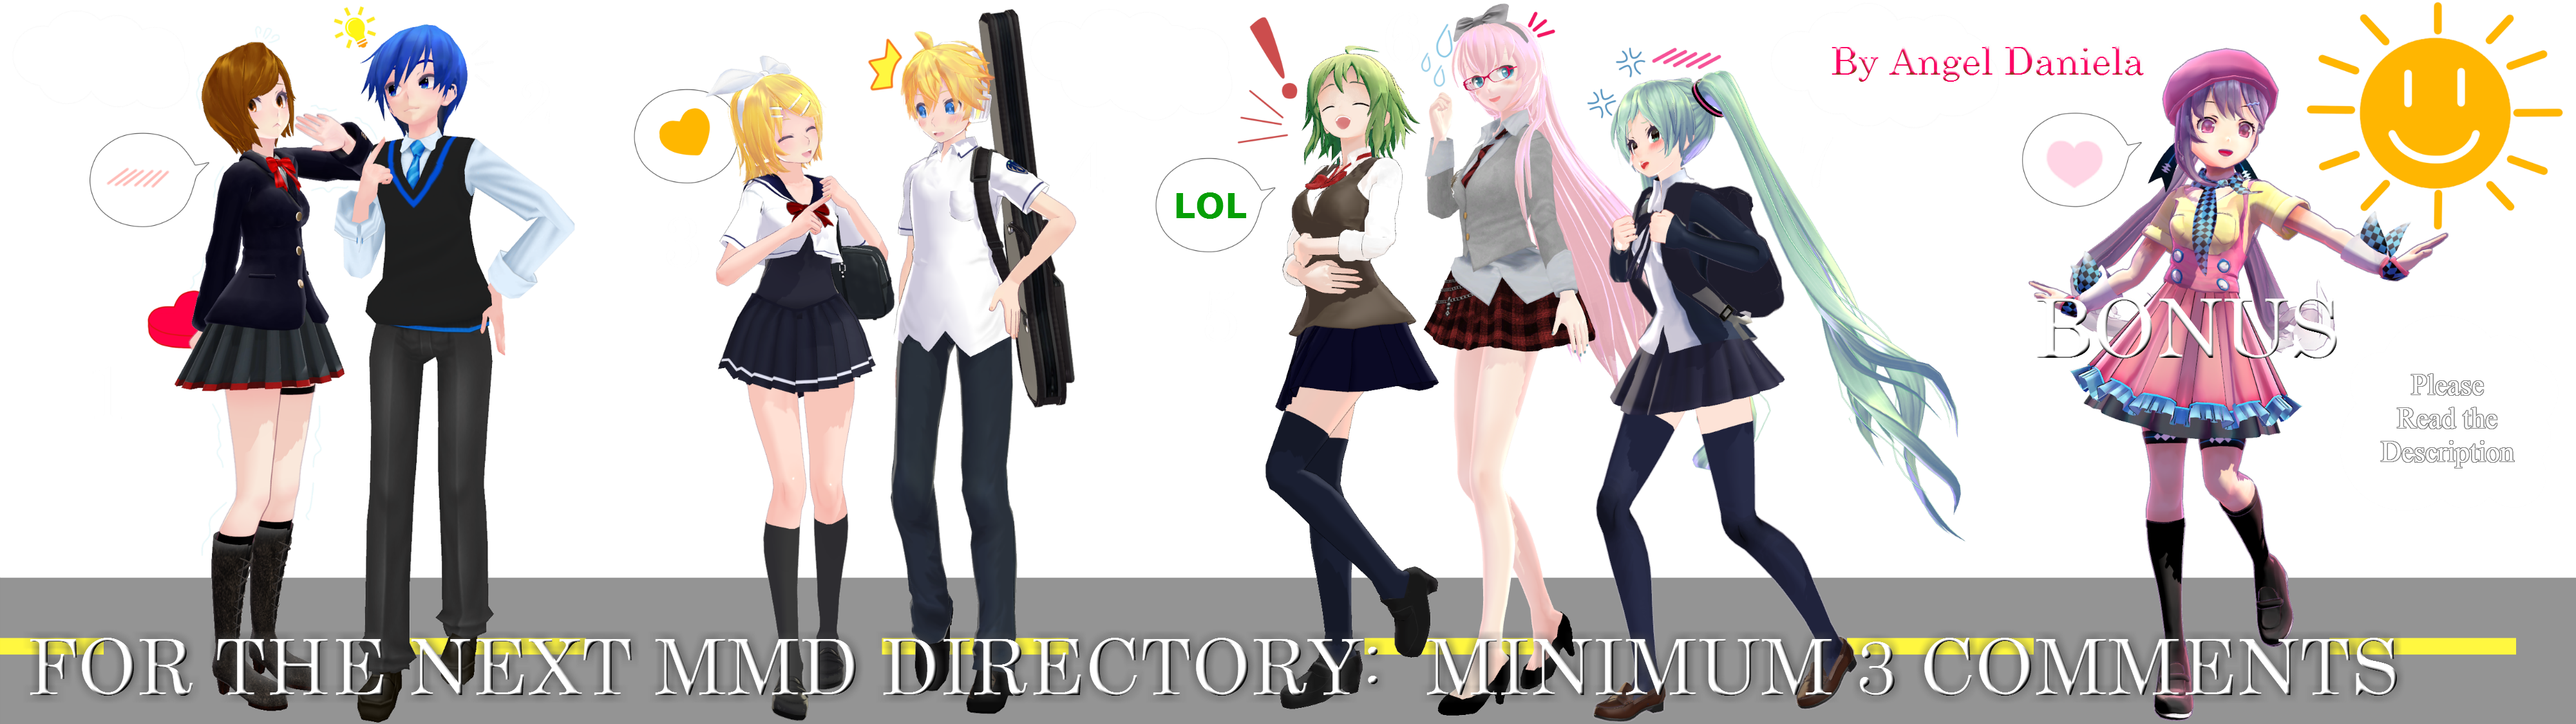 MMD DL Directory 14 [+ Pose Pack DL] by Angela-16 on ...